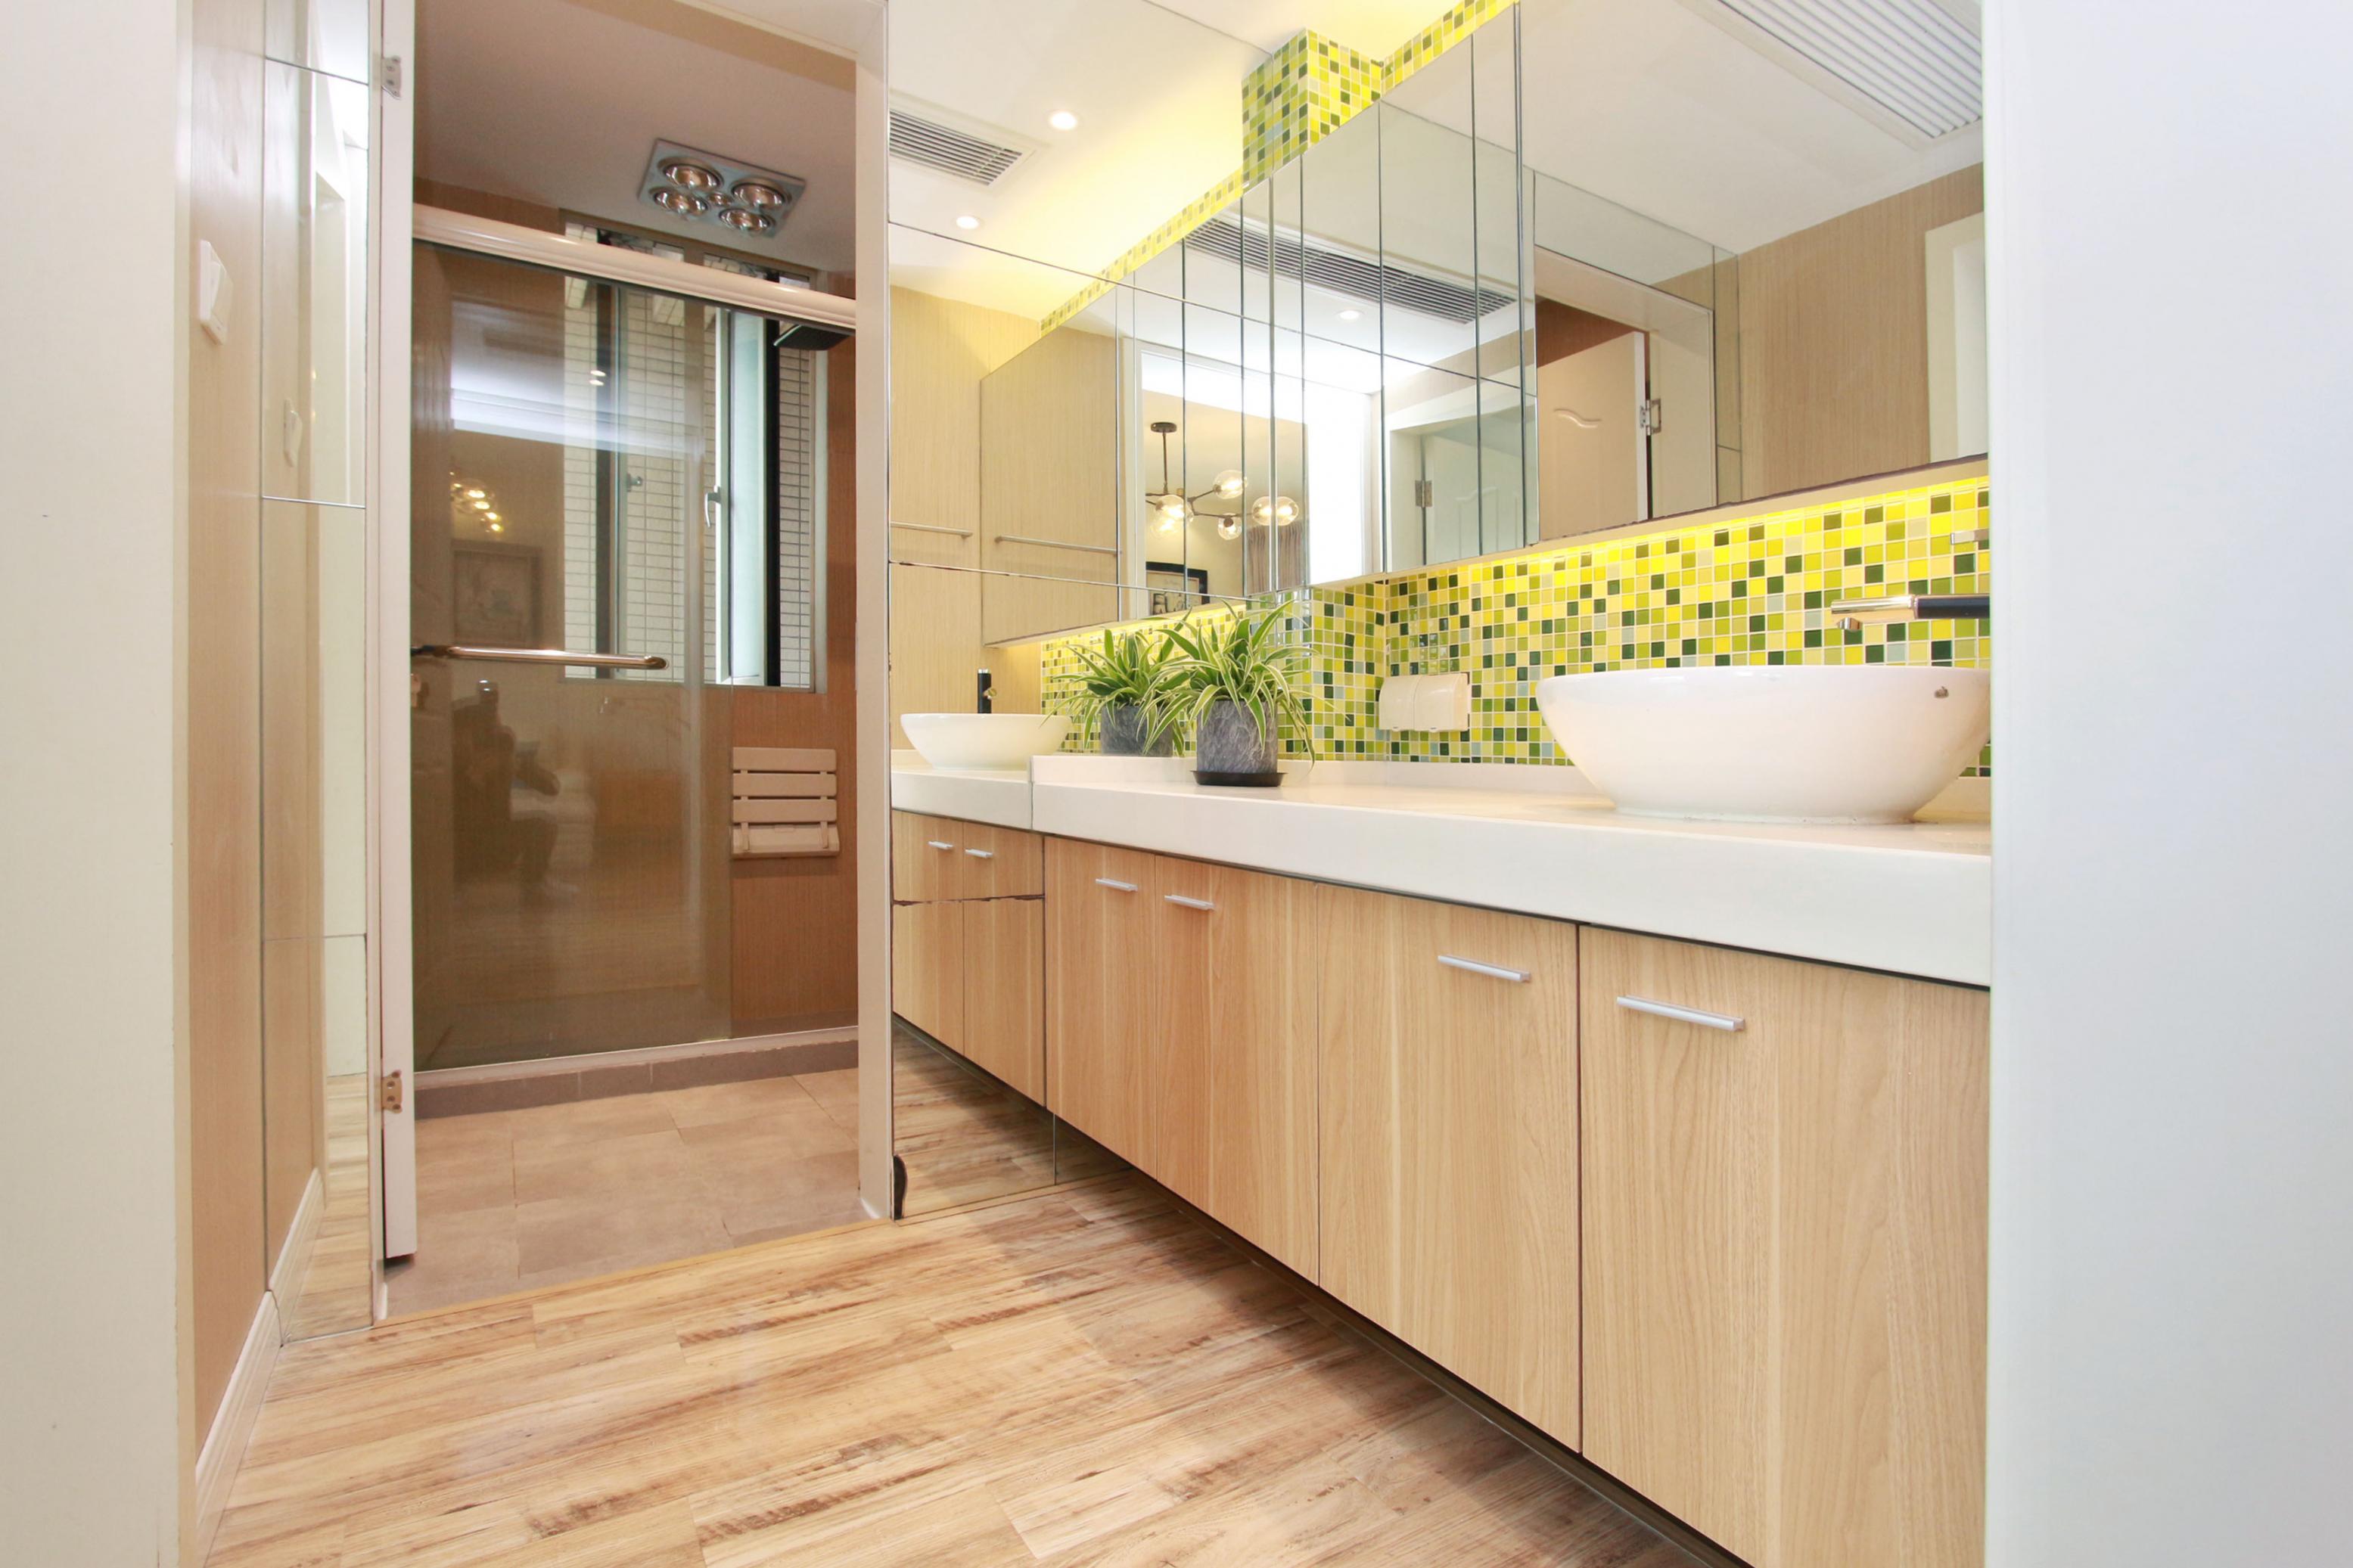 new bathroom Renovated Modern High-end Ladoll 1BR Apt LN 2/12/13 for Rent in Shanghai